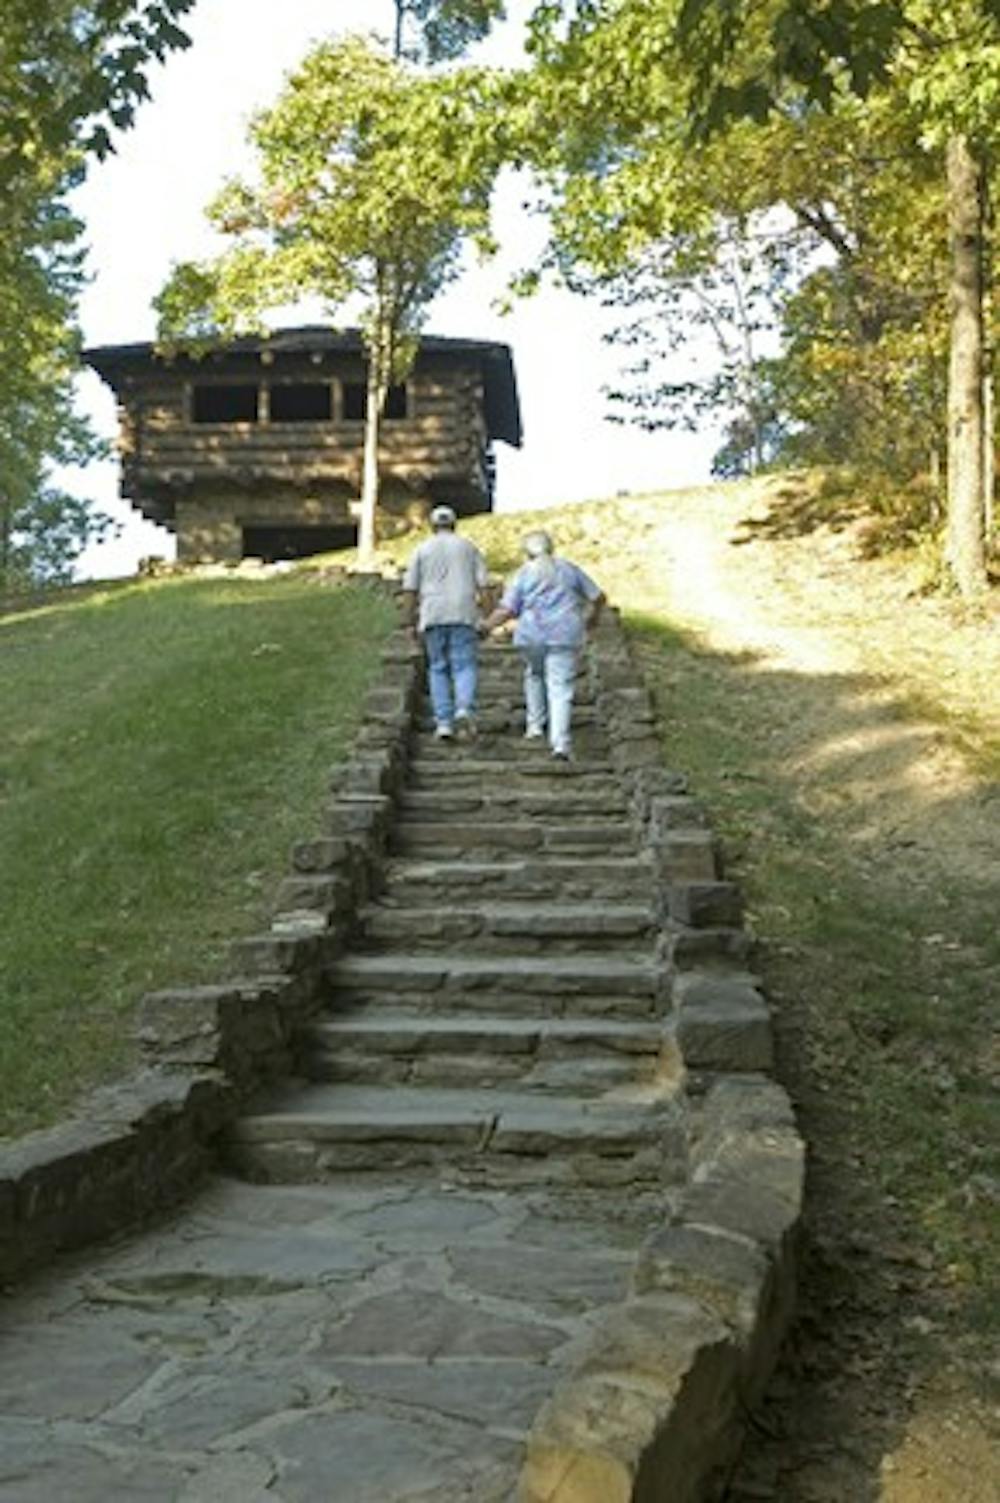 Georgia Perry
A couple walks up the stairs to the North Lookout at Brown County State Park on Saturday afternoon, October 6.